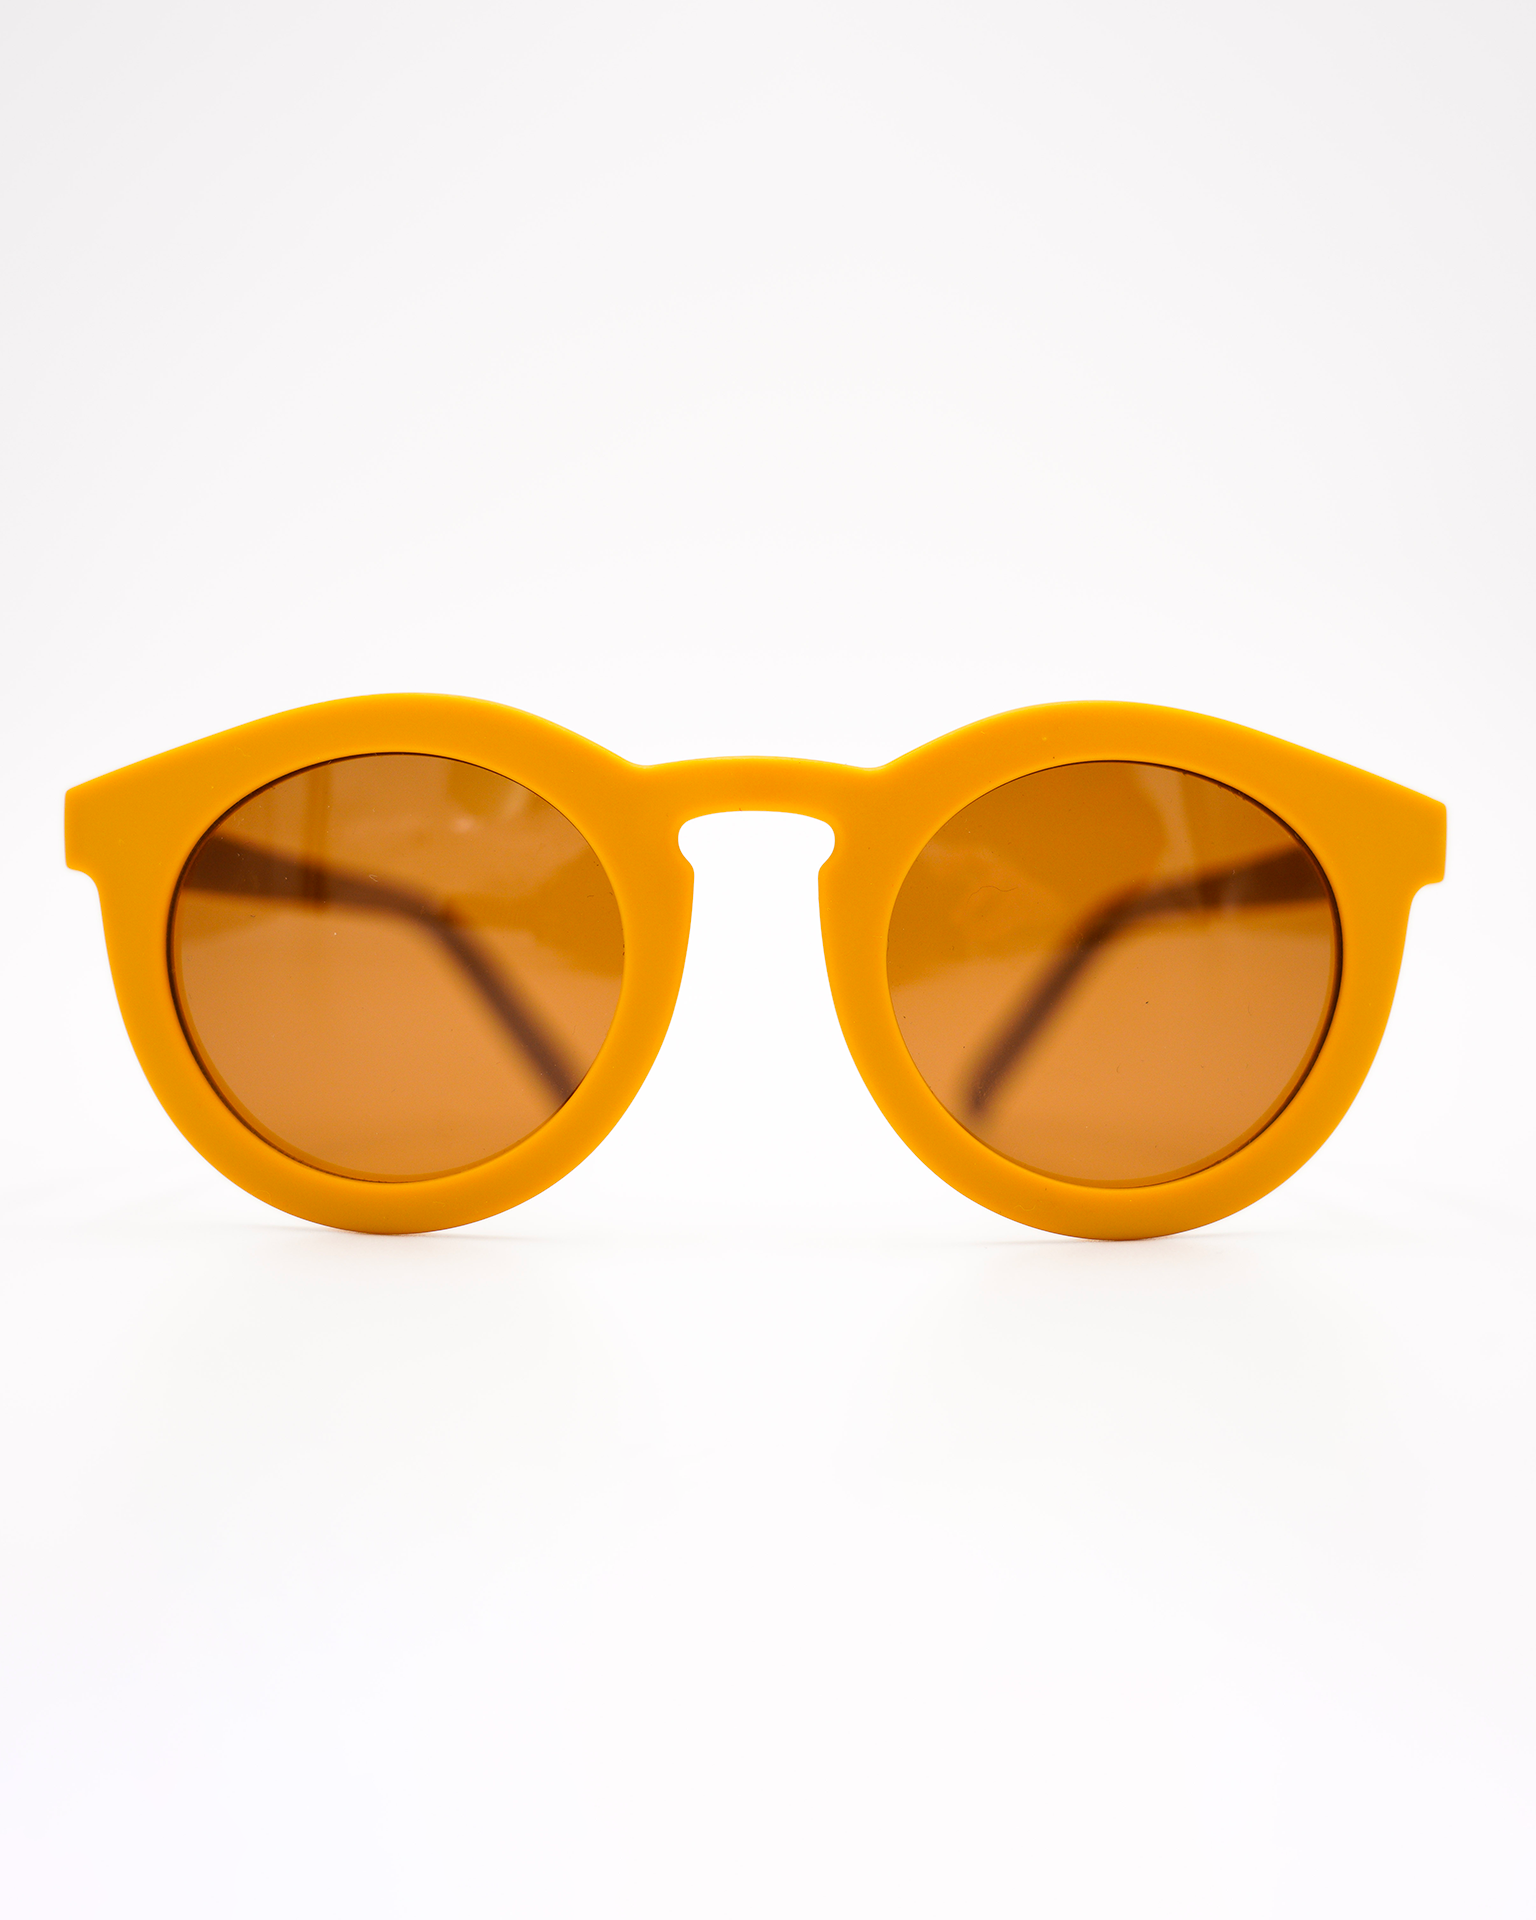 Little grech + co accessories polarized baby sunglasses in wheat